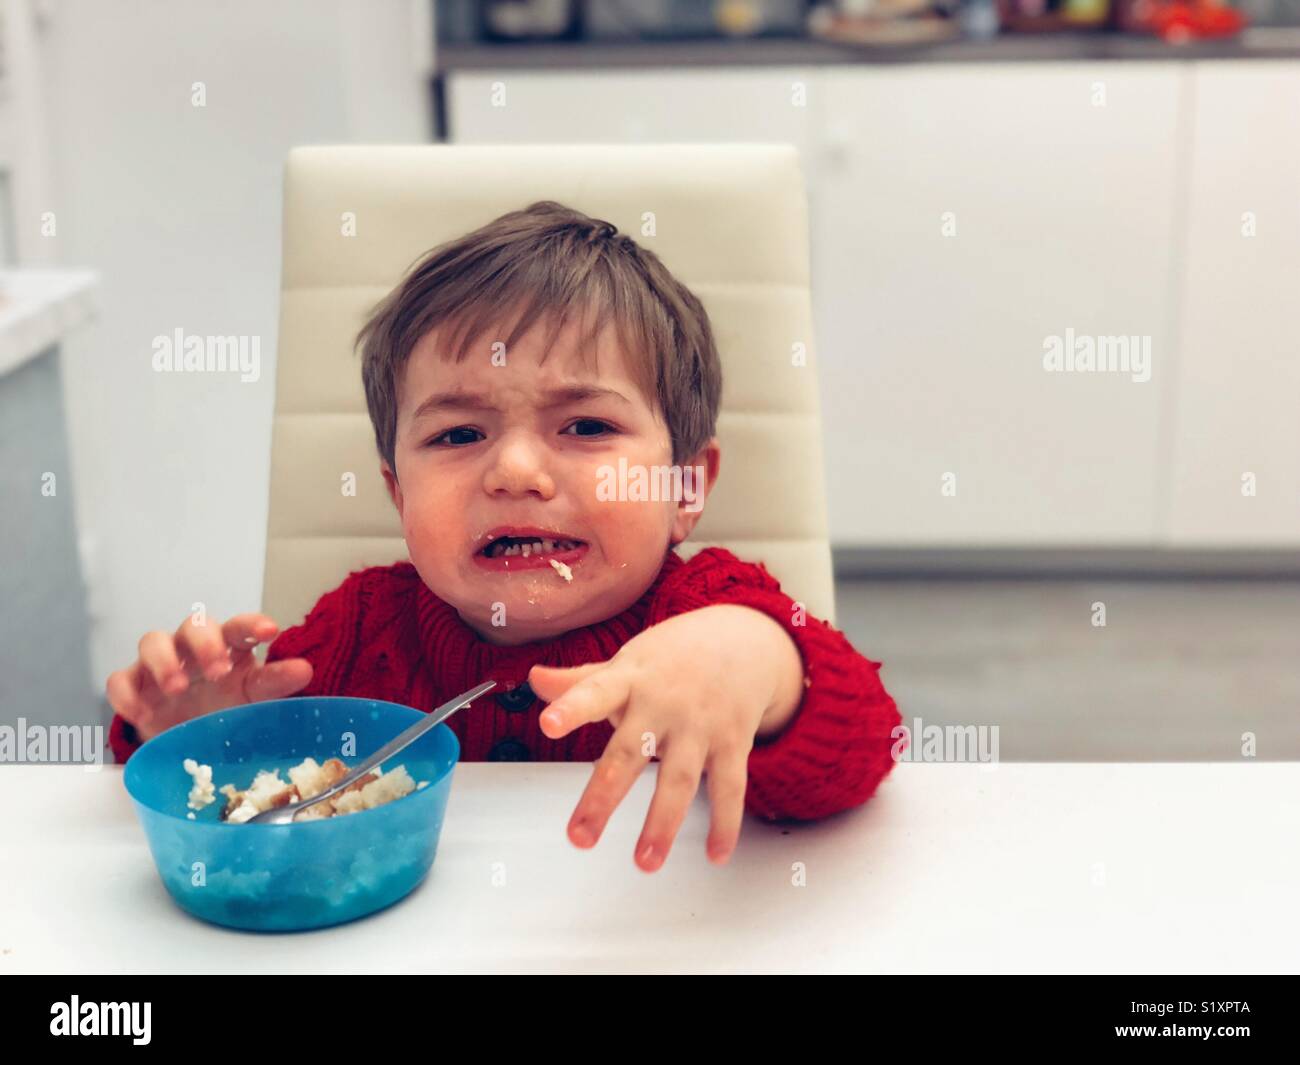 Unhappy baby boy eating by himself Stock Photo